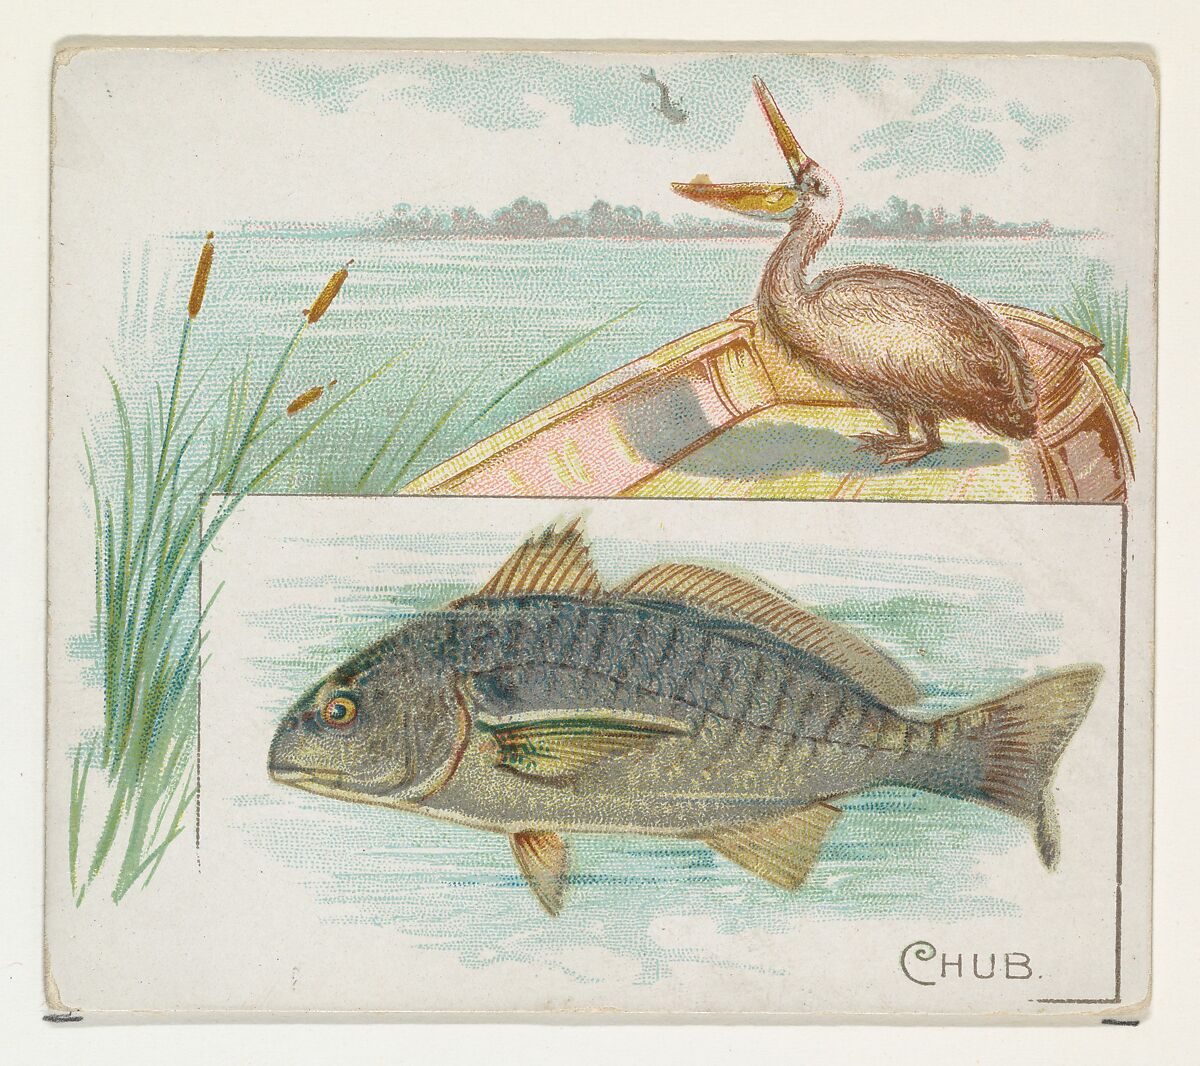 Chub, from Fish from American Waters series (N39) for Allen & Ginter Cigarettes, Issued by Allen &amp; Ginter (American, Richmond, Virginia), Commercial color lithograph 